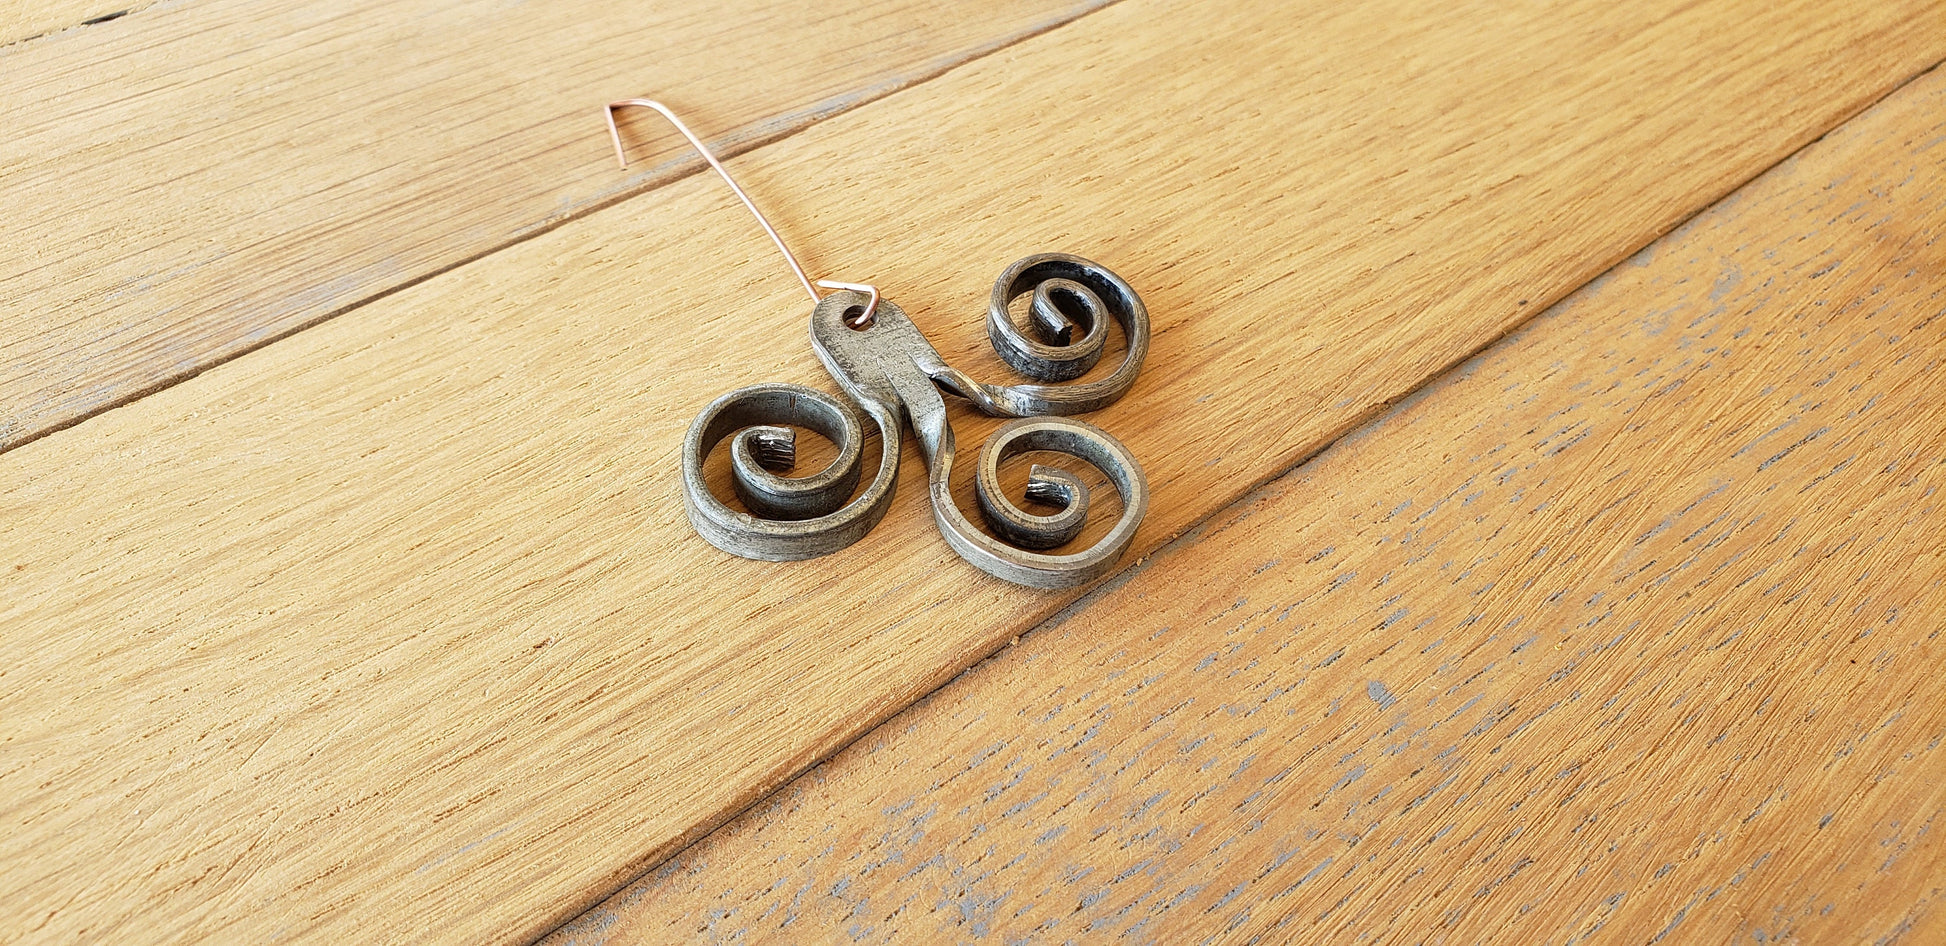 Wine Barrel Ring Ornaments "Tolu" Made from retired CA wine barrel rings 100% Reclaimed + Free US Shipping!